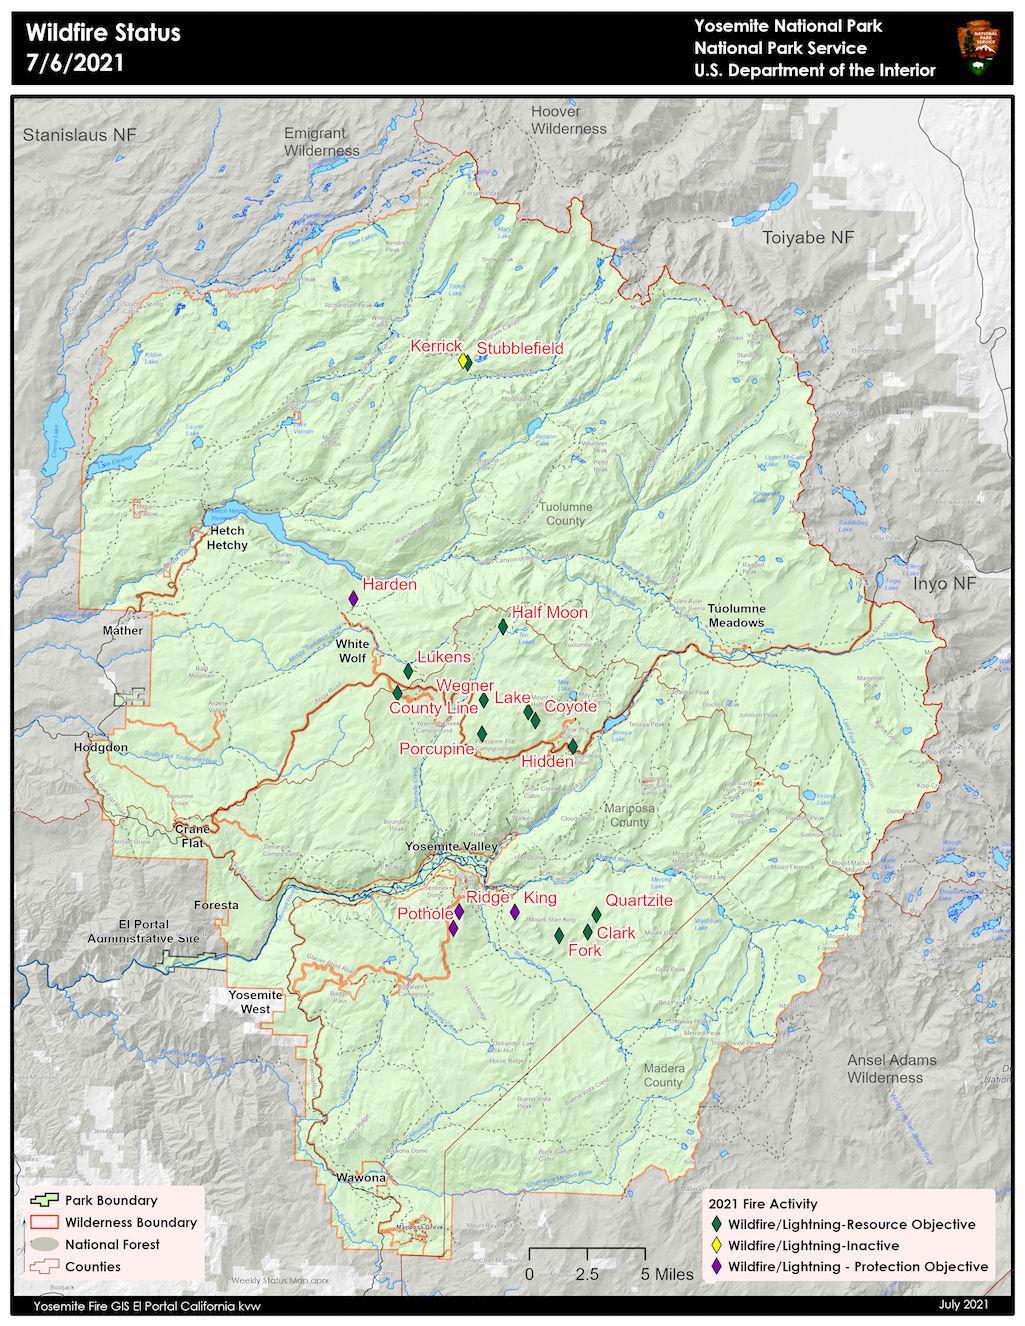 Recent thunderstorms sparked at least 18 wildfires in Yosemite National Park/NPS